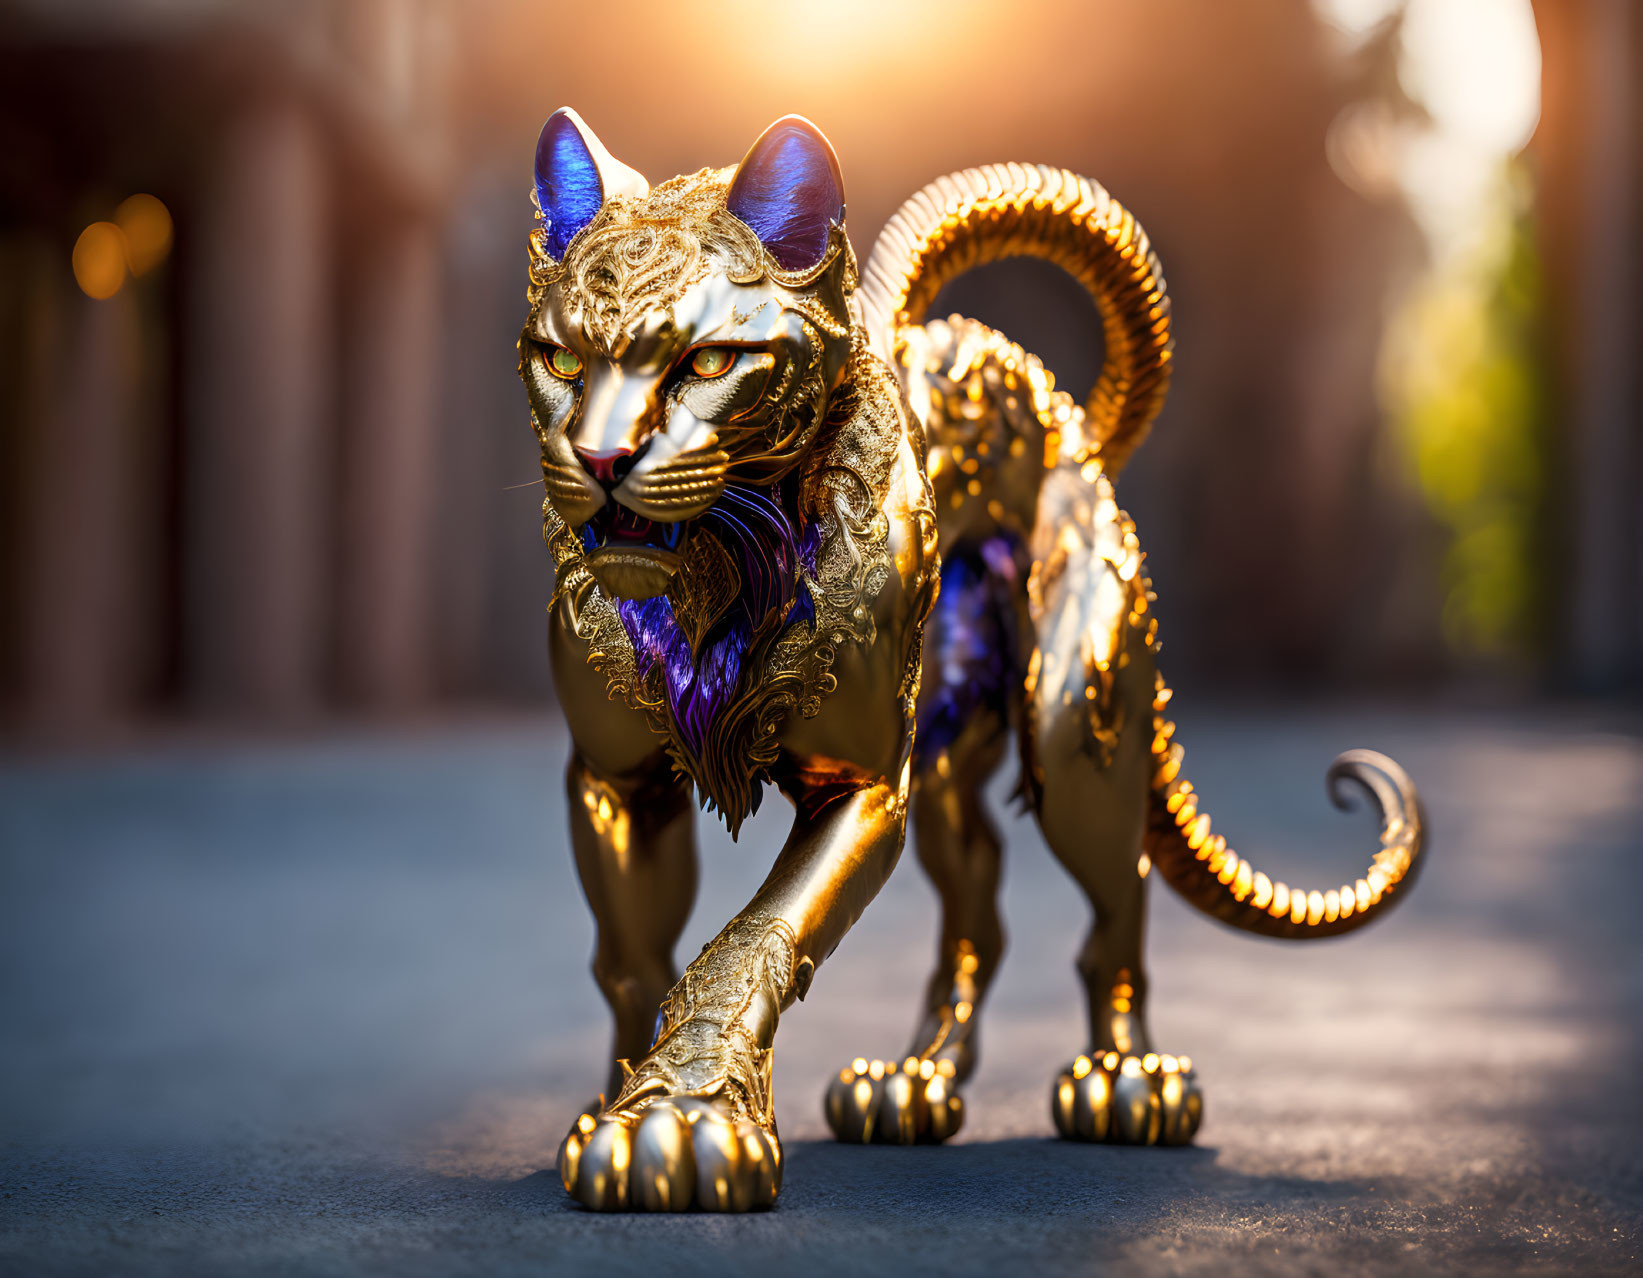 Metallic Cat Figure with Gilded Design and Purple Detailing on Cobblestone Surface